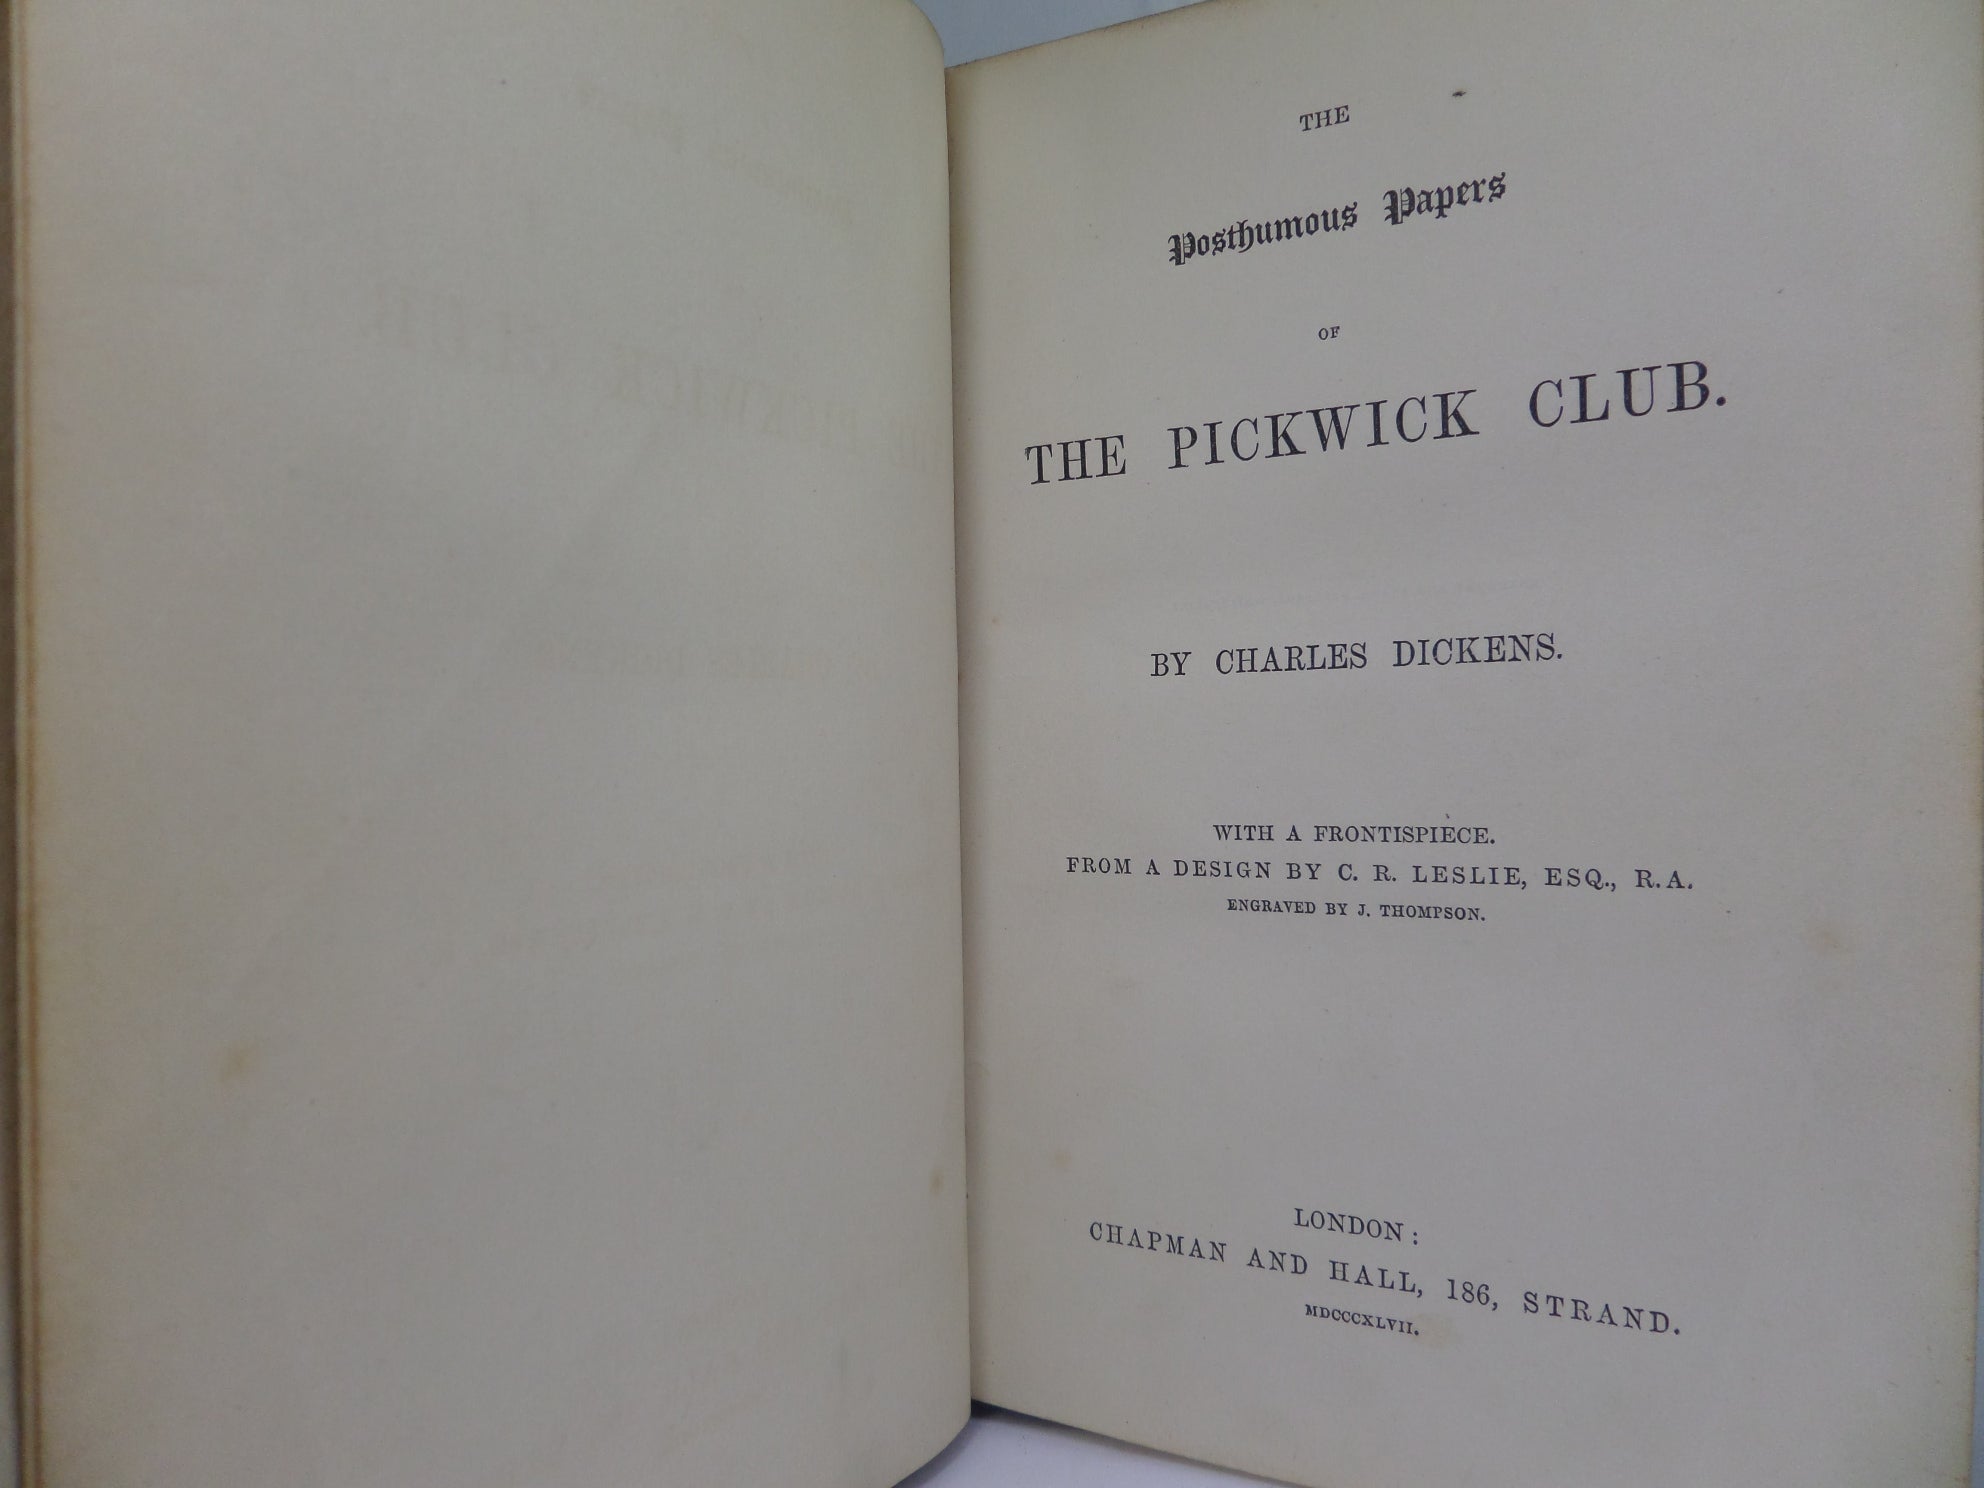 THE PICKWICK PAPERS BY CHARLES DICKENS 1847 LEATHER BINDING